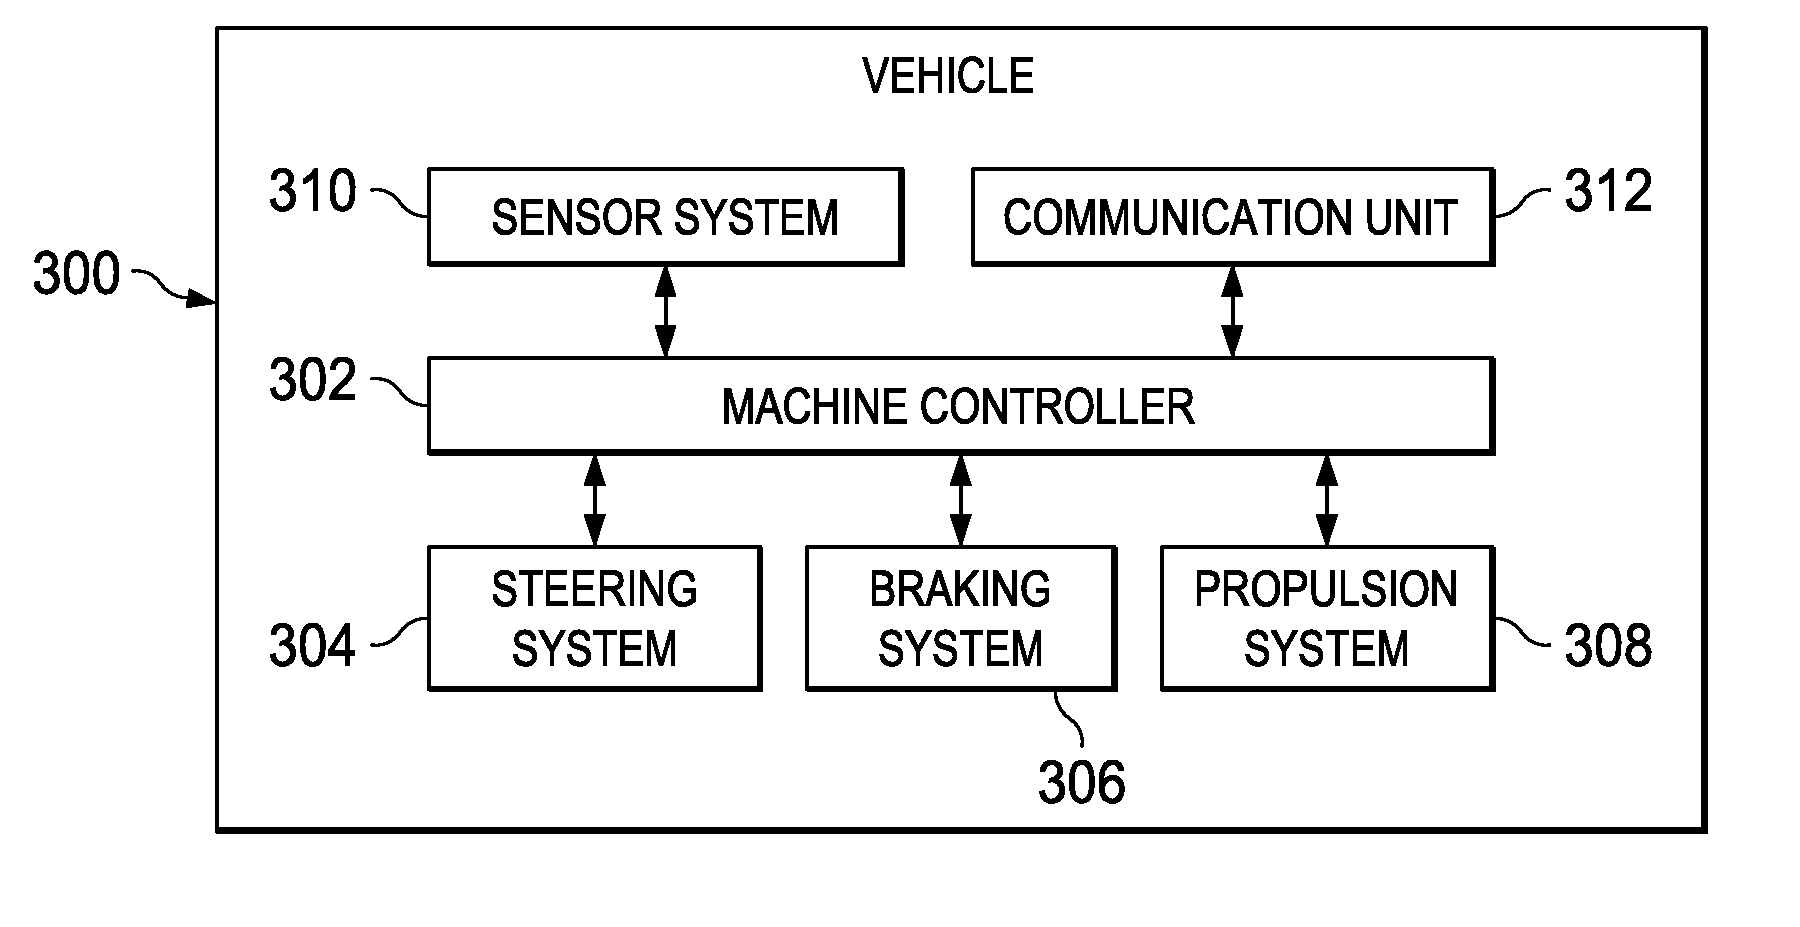 Vehicle with high integrity perception system